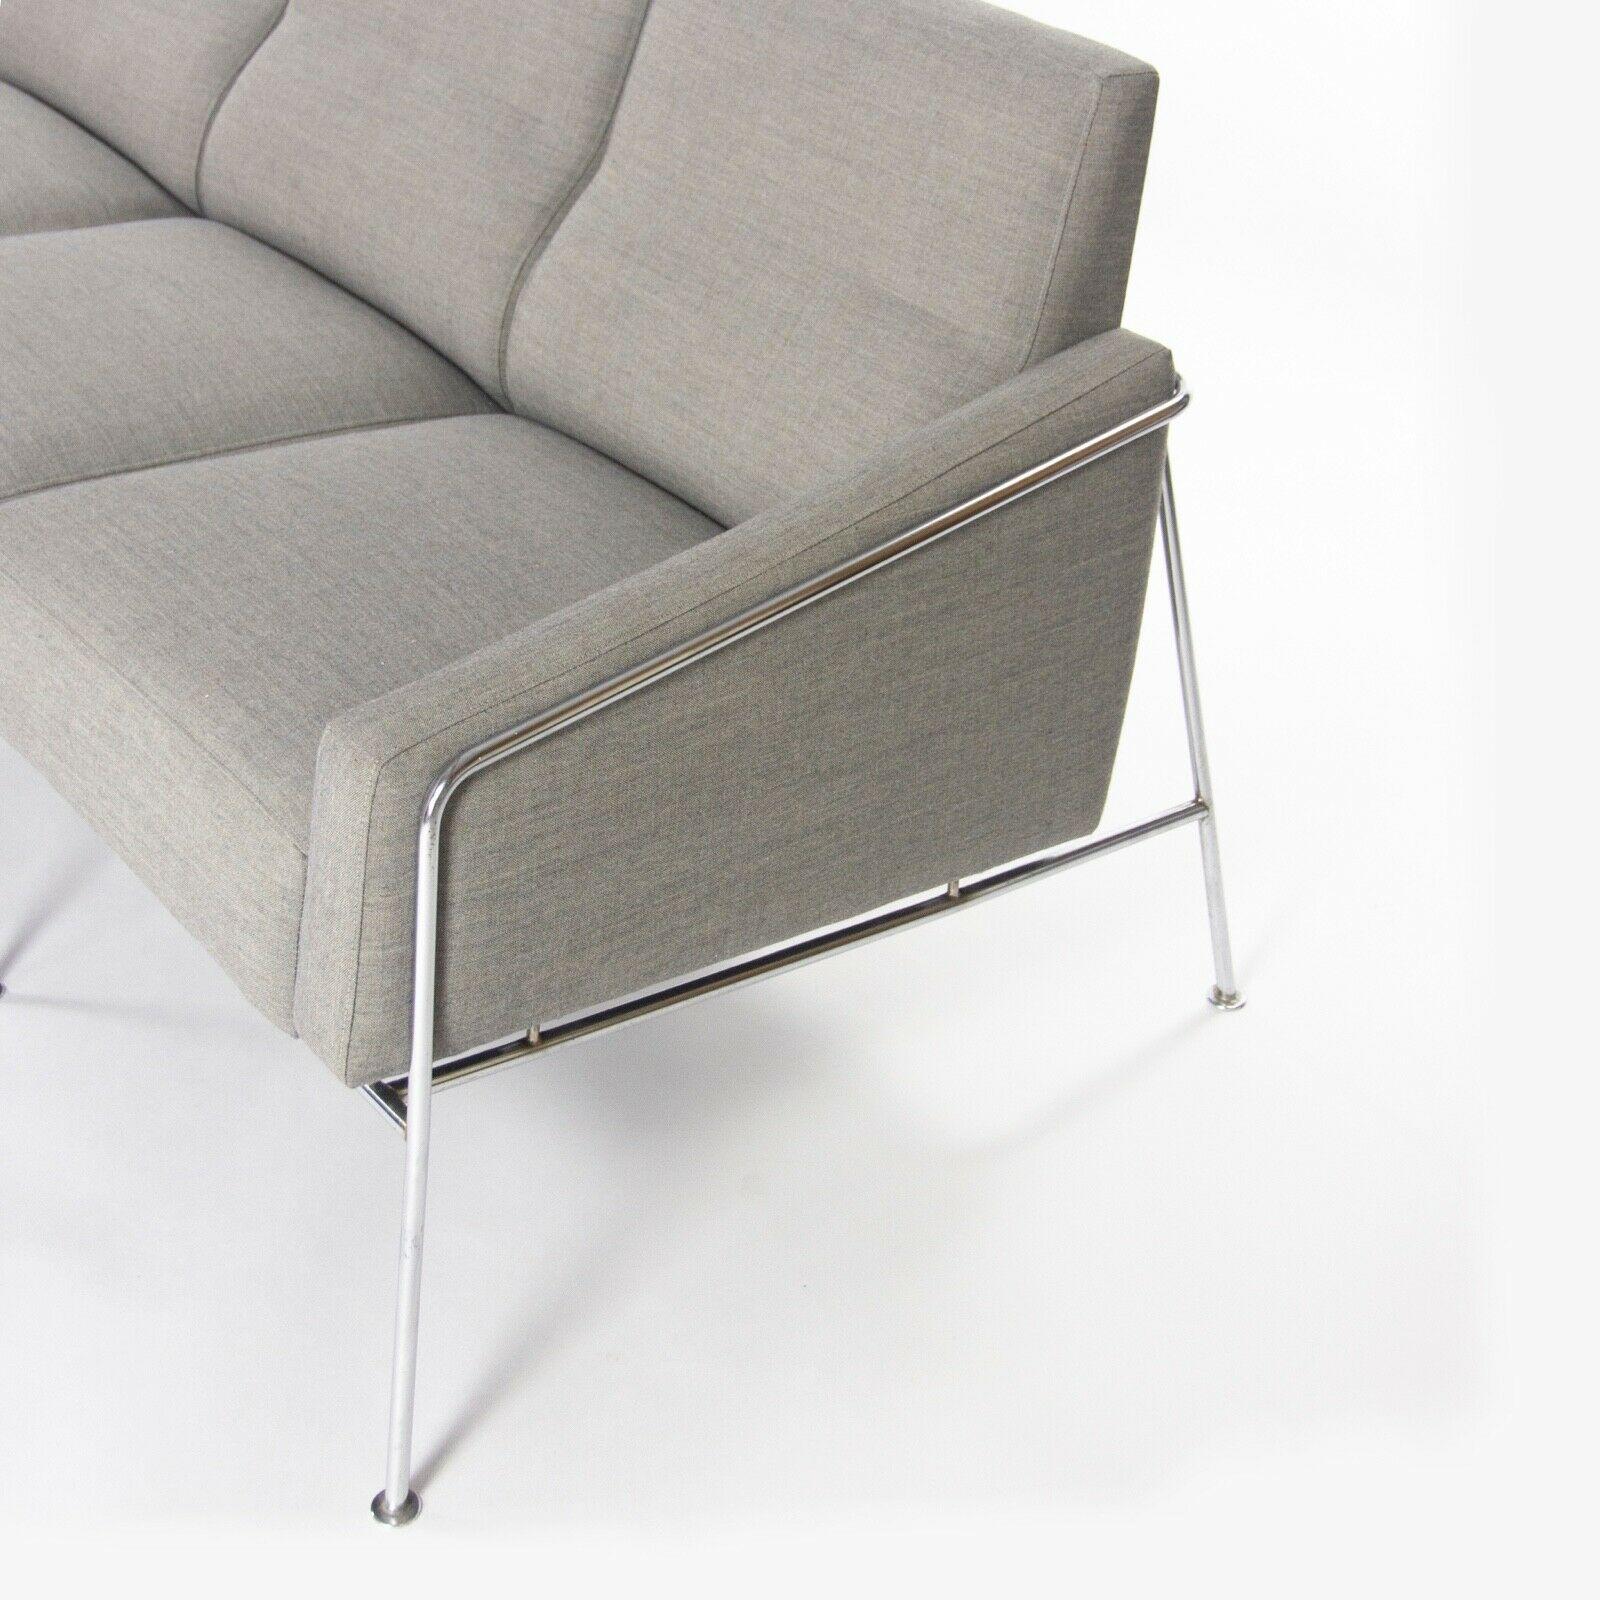 Listed for sale is a Model 3300/4 sofa, designed by Arne Jacobsen for Fritz Hansen of Denmark. This examples was produced circa 1957. While it is more common to see the single-seater, loveseat, or three-seat sofa, this is a far rarer 89 inch